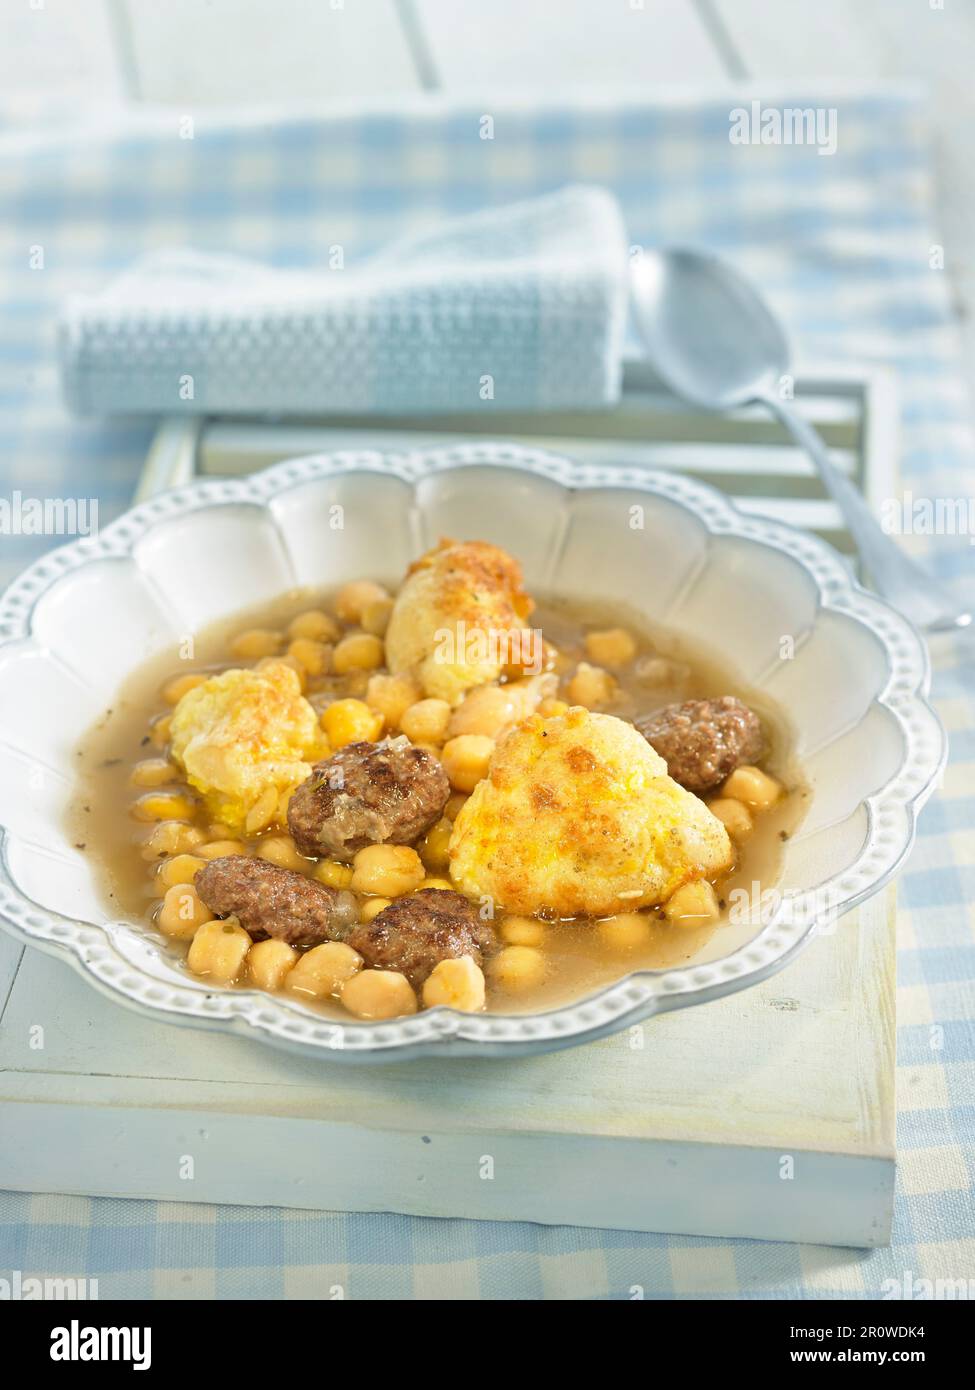 Veal meatballs, cauliflower and chickpea stew Stock Photo